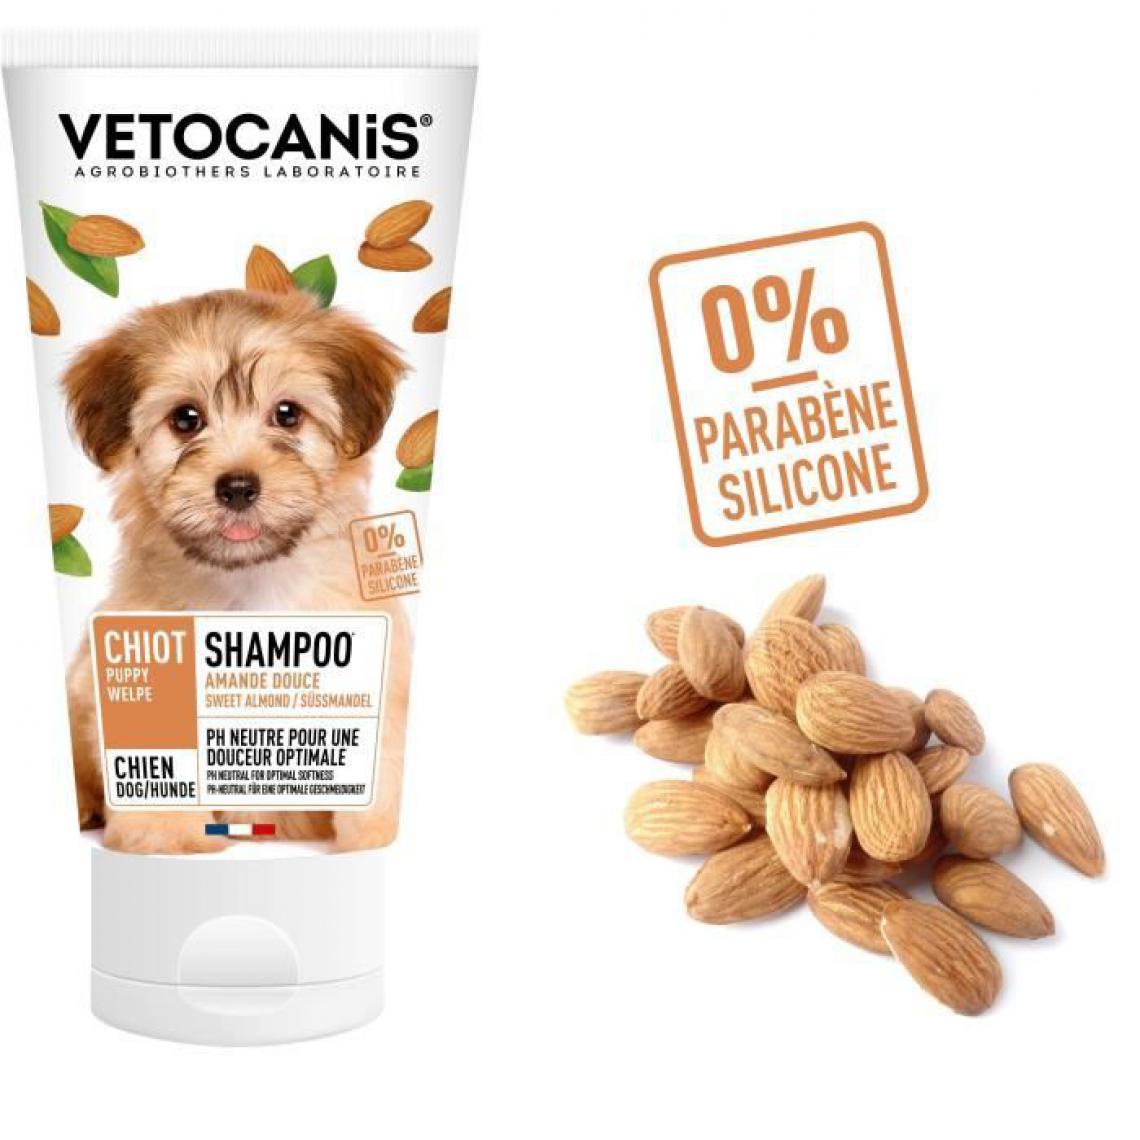 Vetocanis - VETOCANIS Shampoing - 300 ml - 0% Parabene 0% Silicone - Pour chiot - Soin et hygiène rongeur